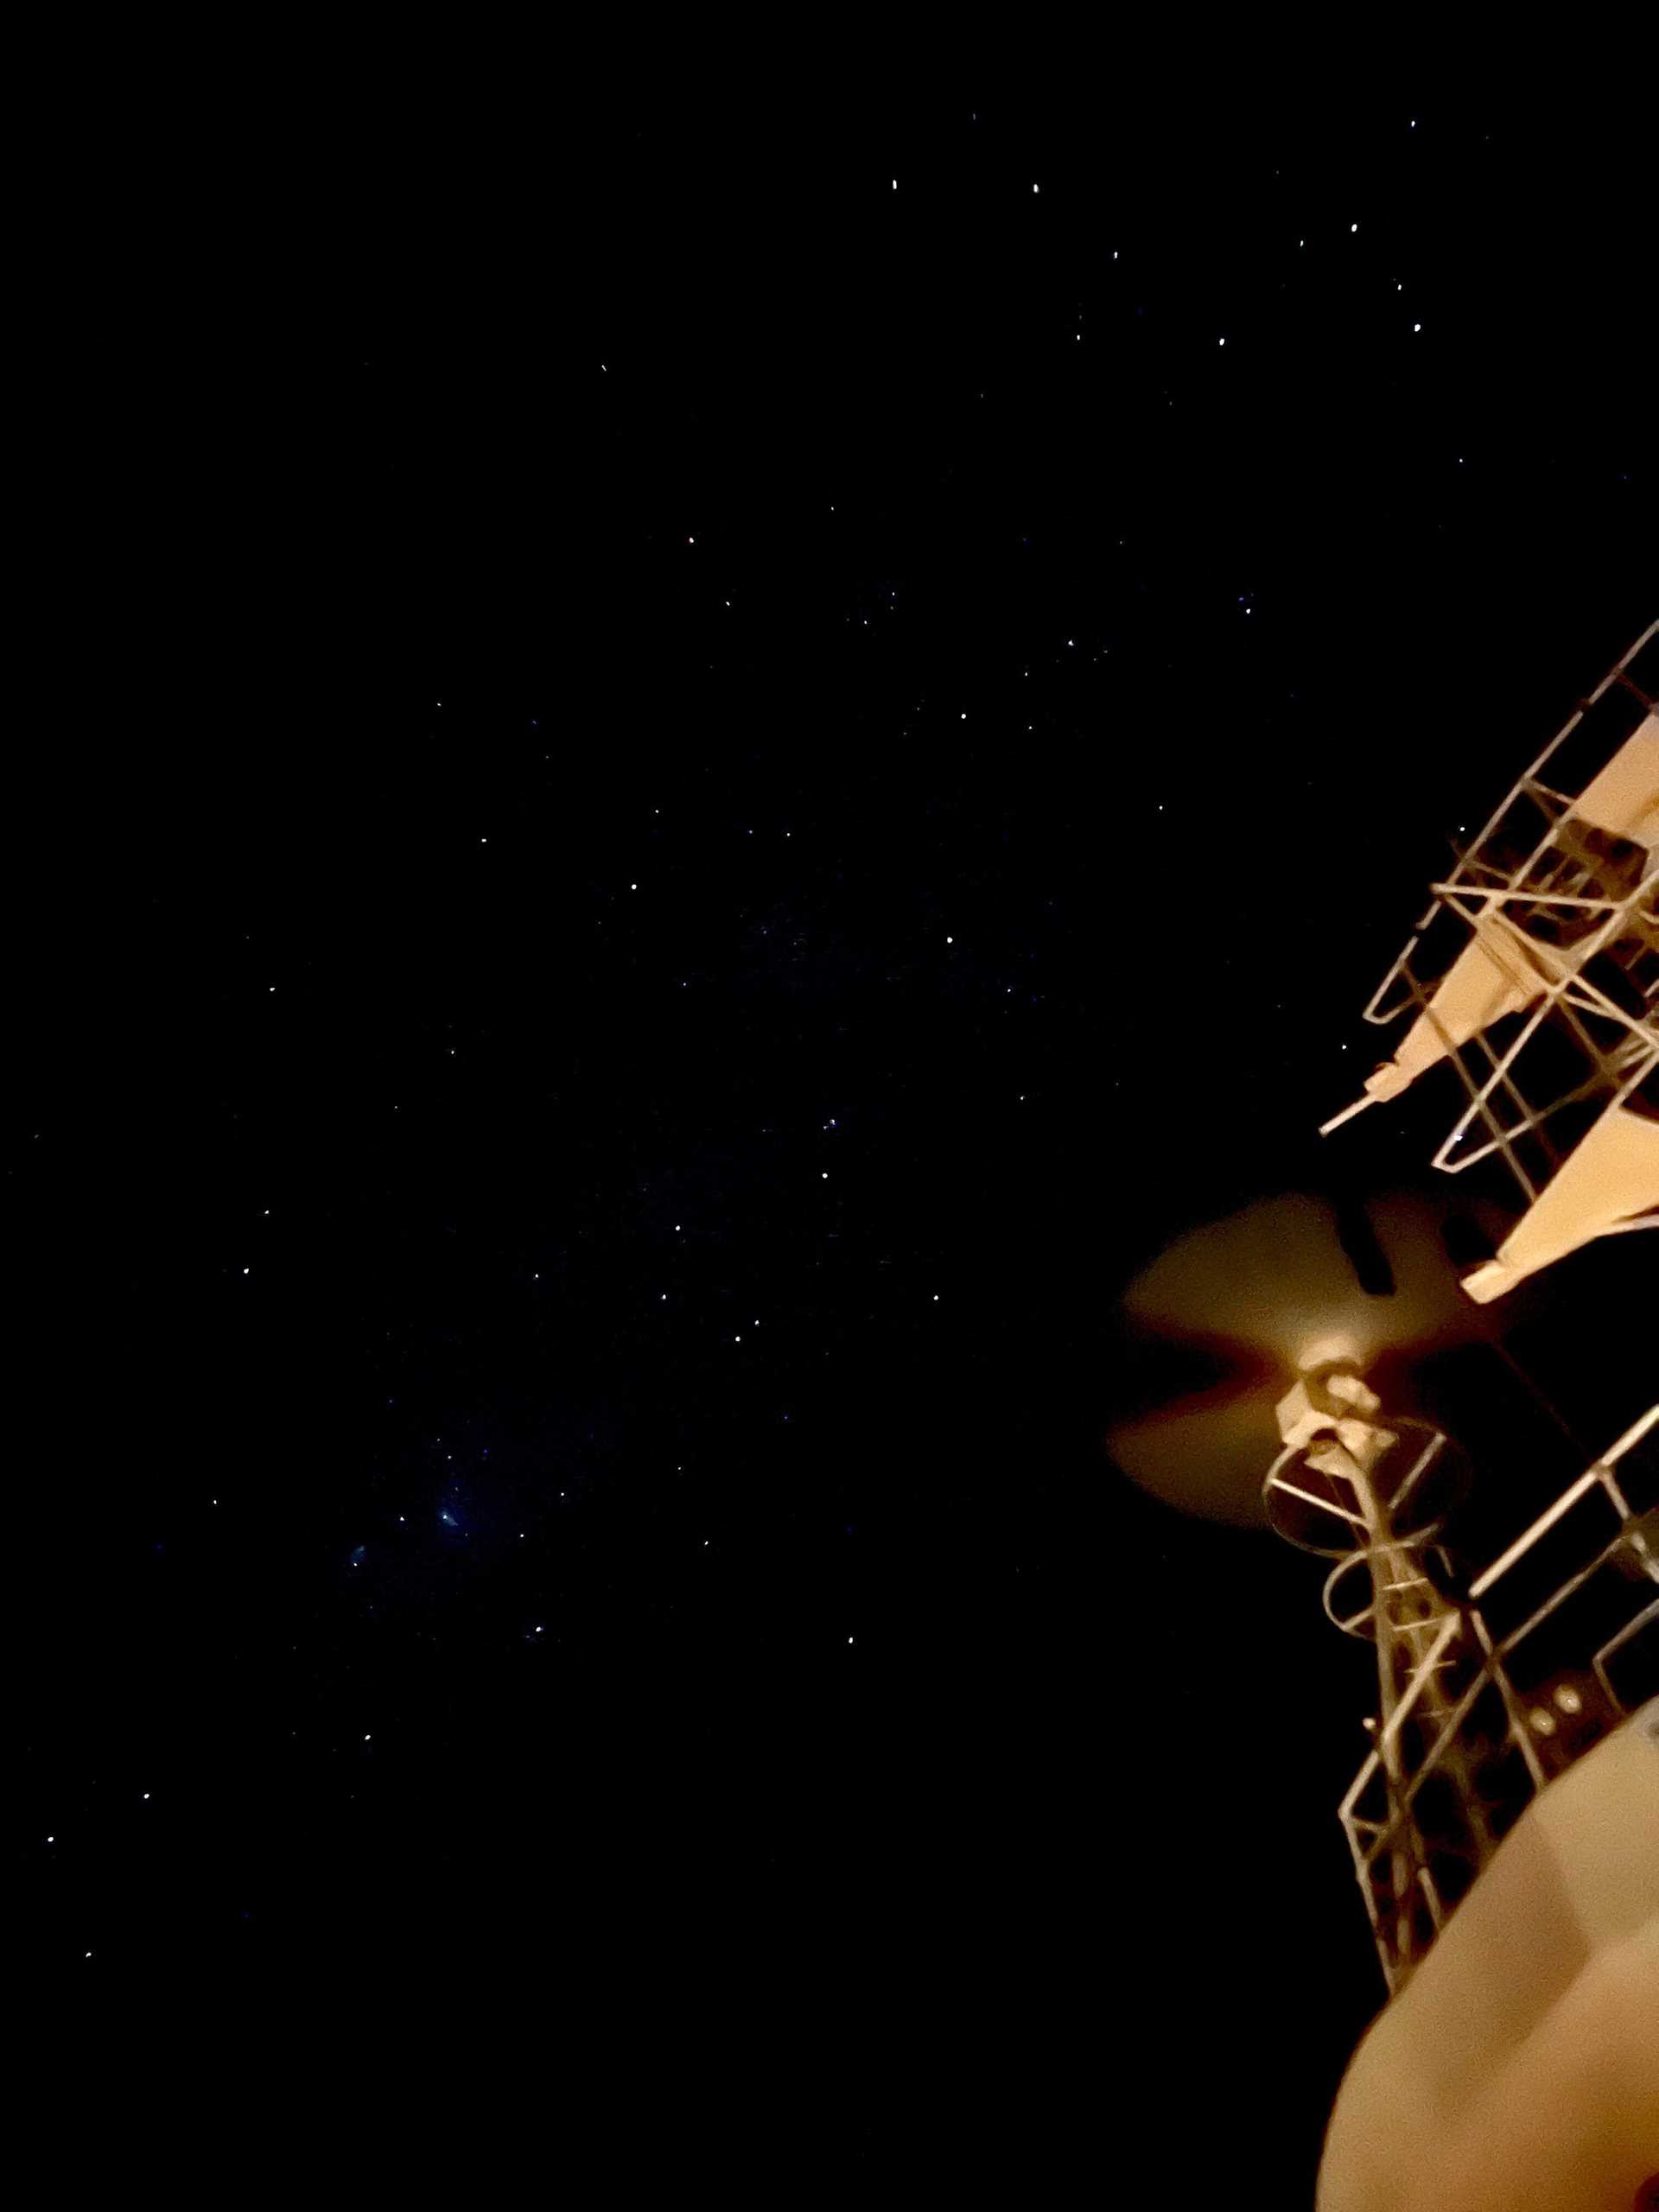 the deck of national geographic orion at night